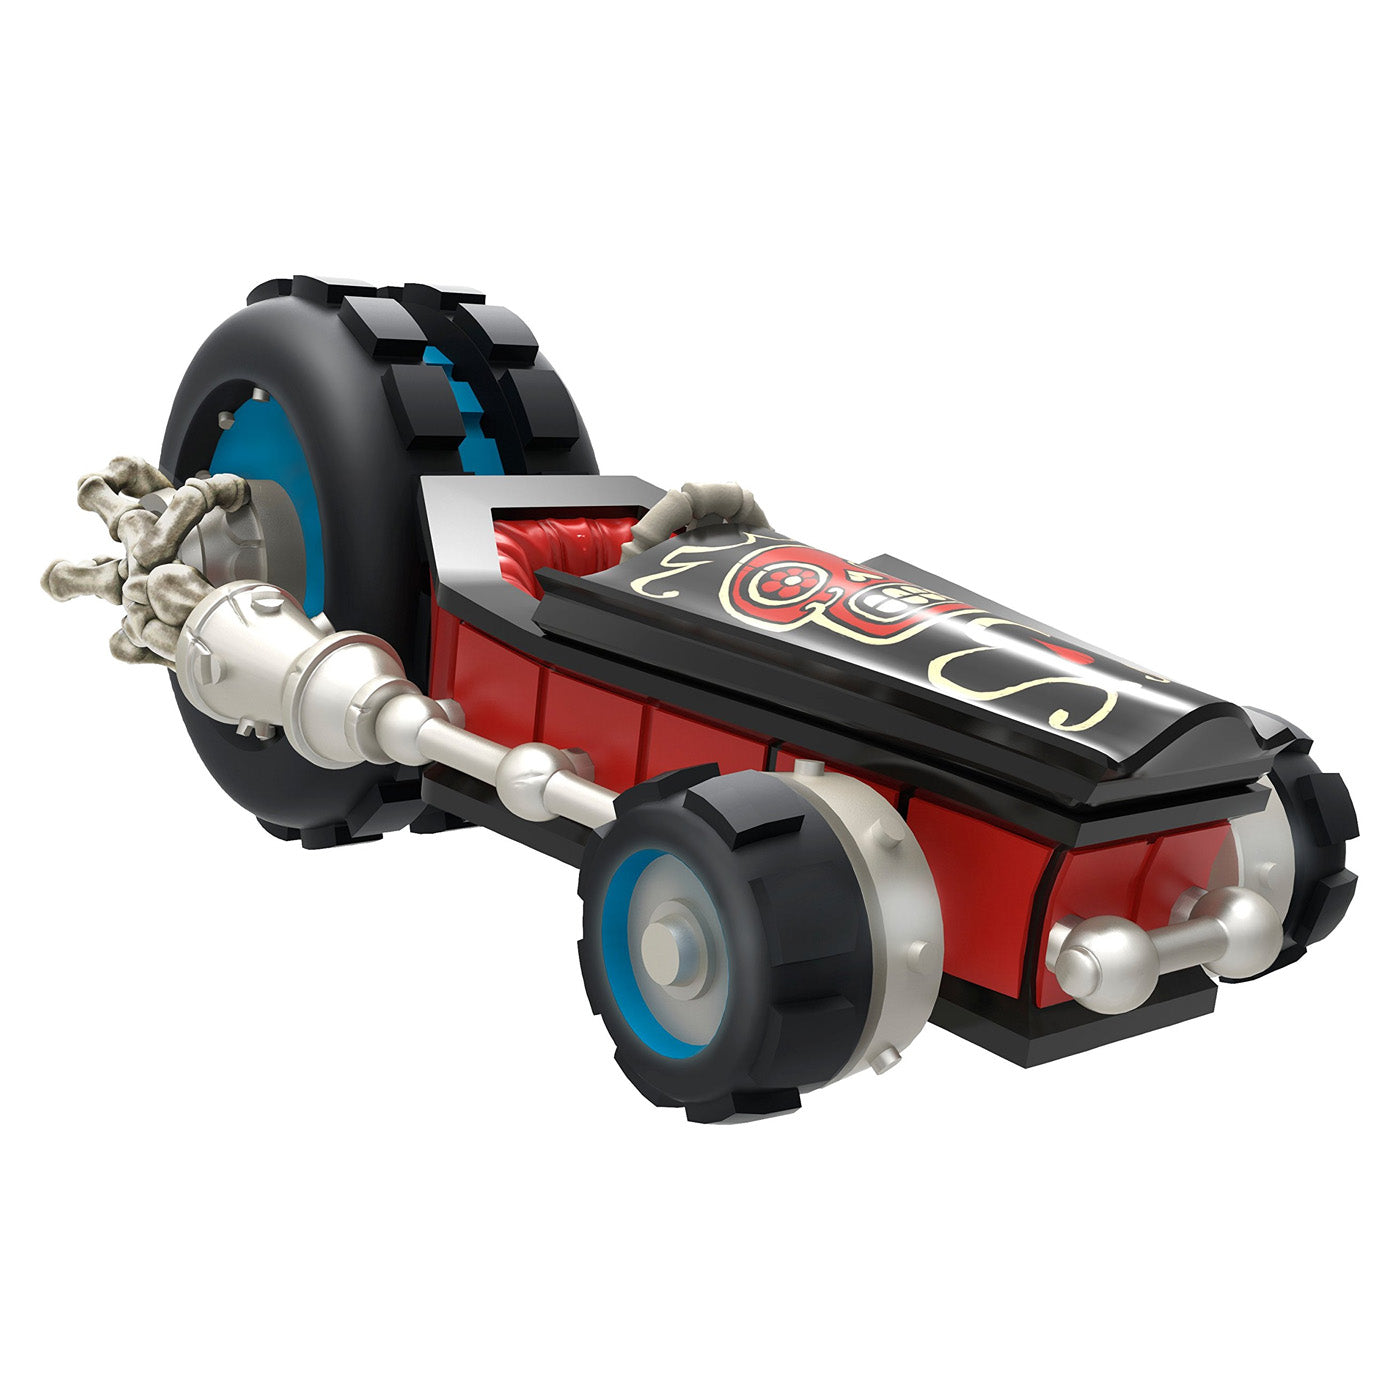 Skylanders Superchargers Vehicle: Crypt Crusher